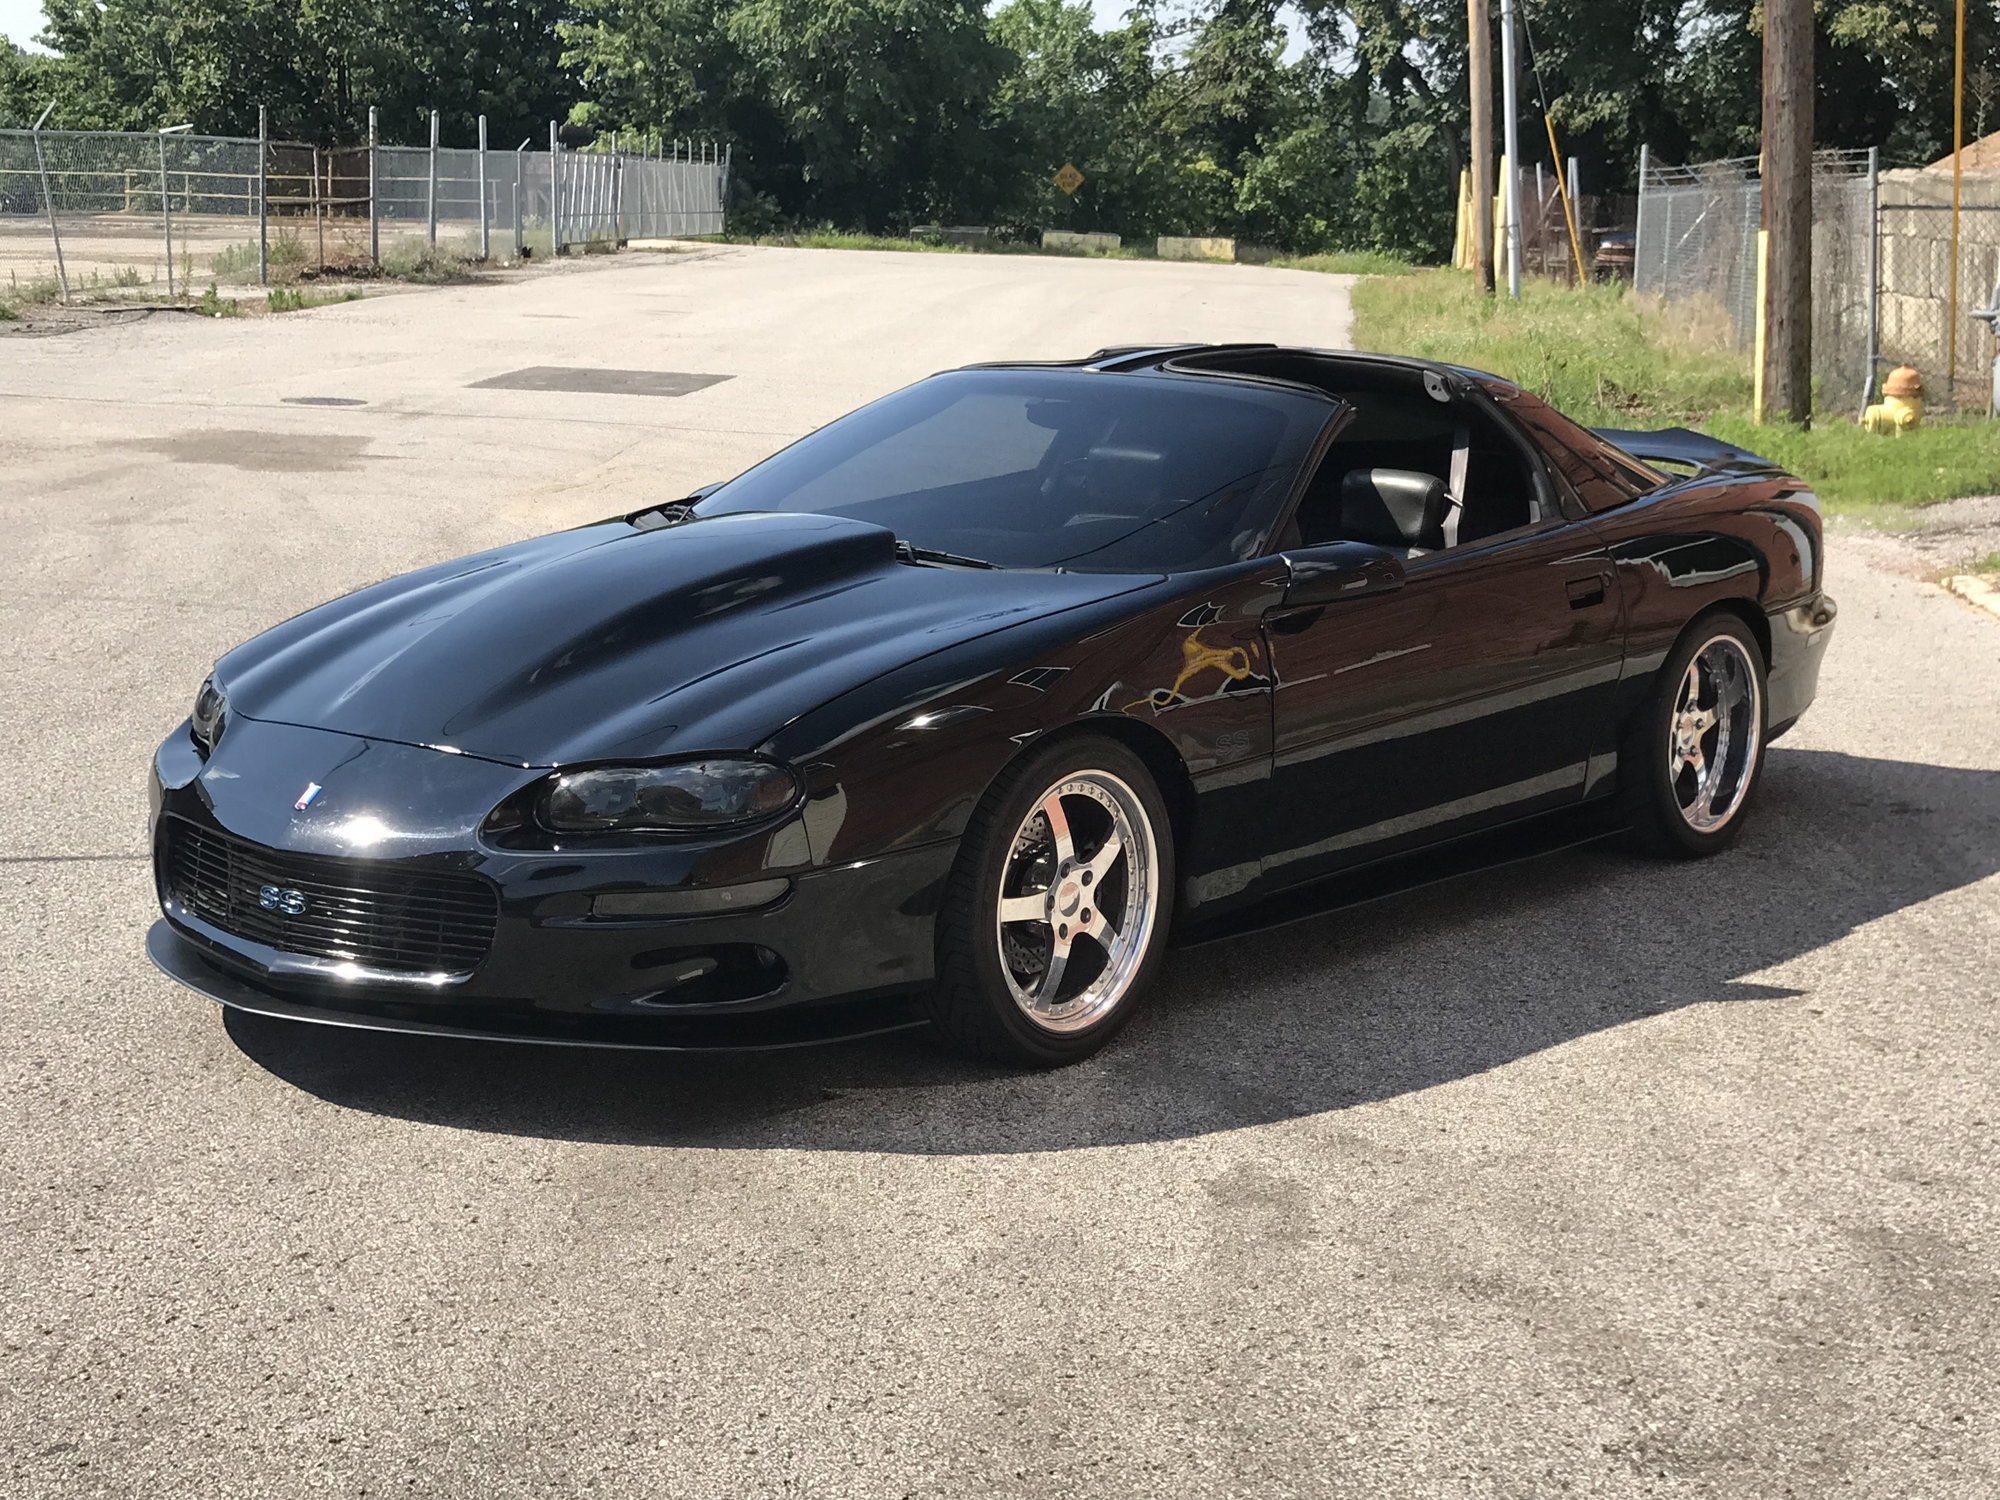 2001 Chevrolet Camaro - 2001 camaro SS supercharged M6 $14500 - Used - VIN 2G1FP22G312125725 - 73,600 Miles - 8 cyl - 2WD - Manual - Coupe - Black - Owensboro Ky, KY 42301, United States